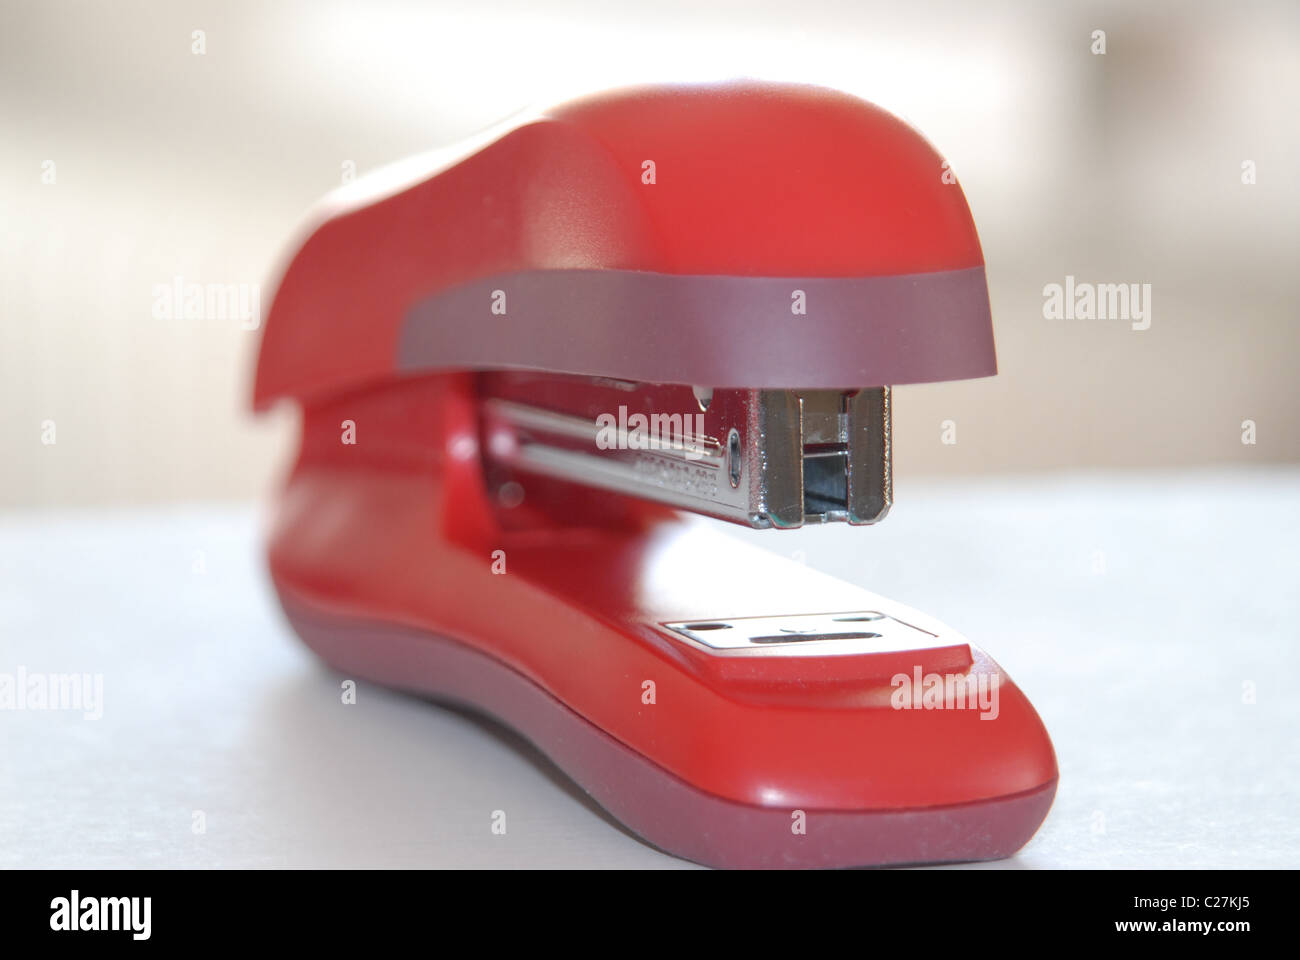 Red stapler on a white desk by a window, front view. Stock Photo